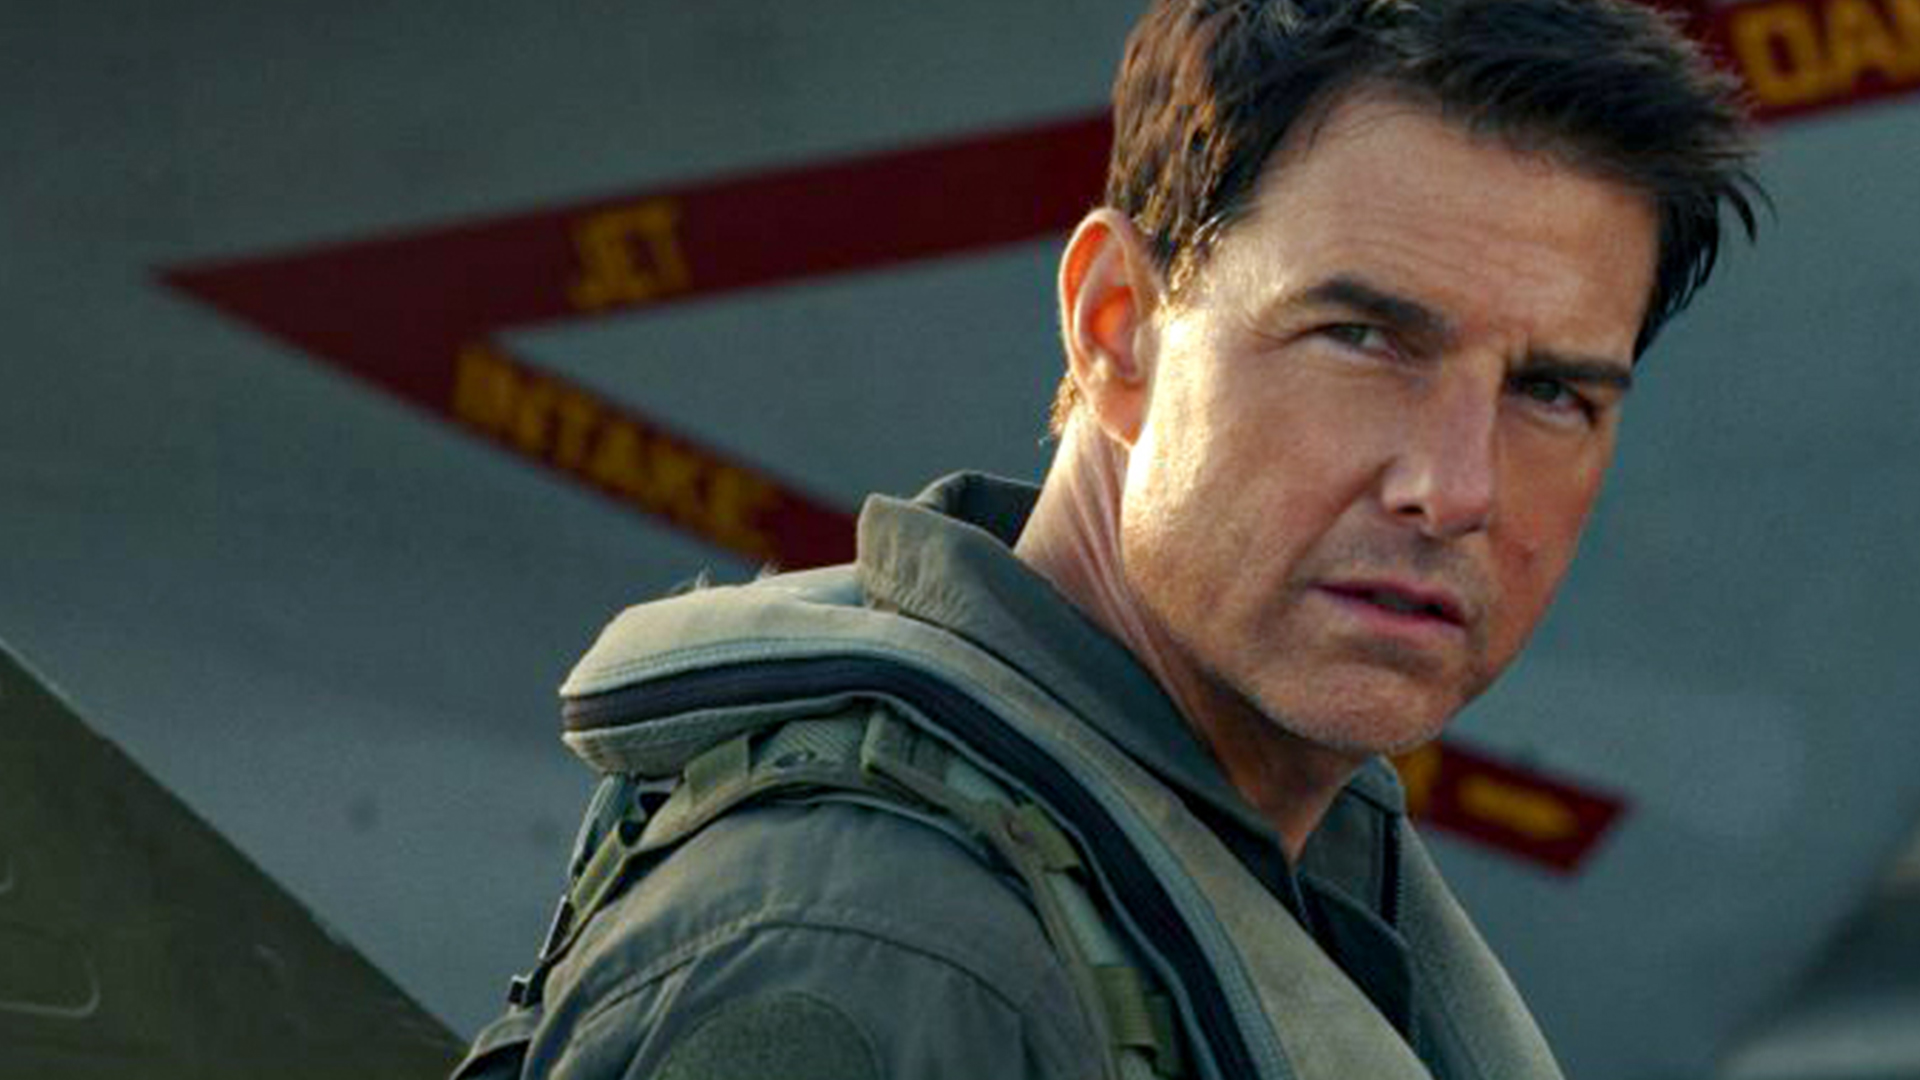 TOP GUN: MAVERICK REVIEW: TOM CRUISE SOARS IN AN ACTION SEQUEL FOR THE AGES